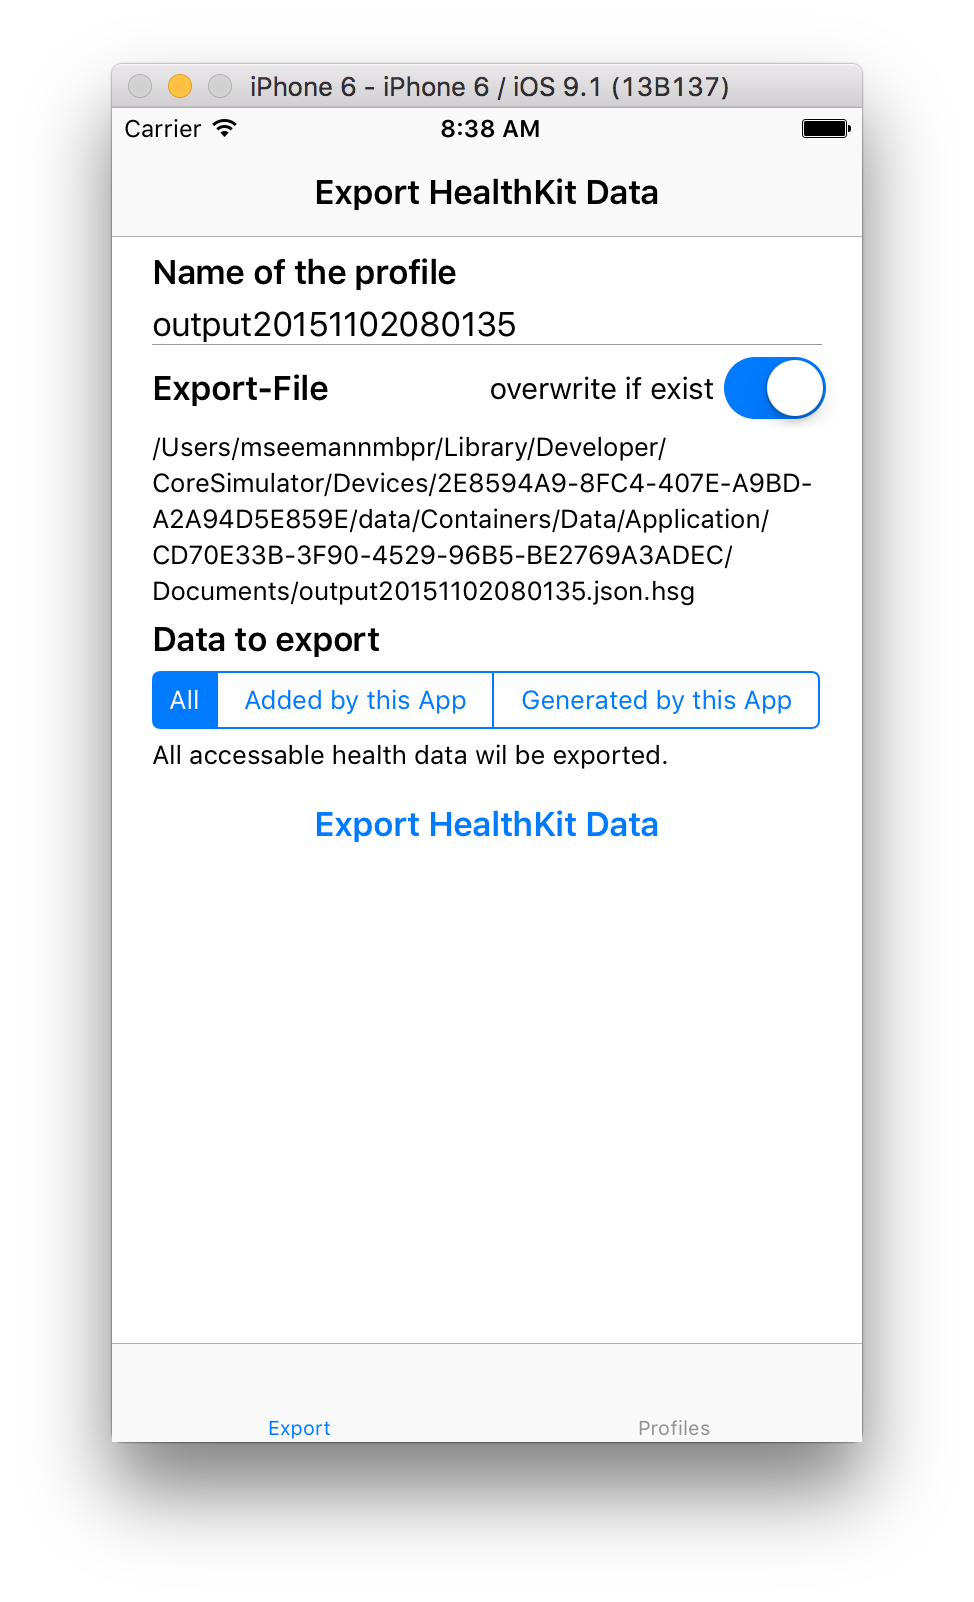 Export using the Example App